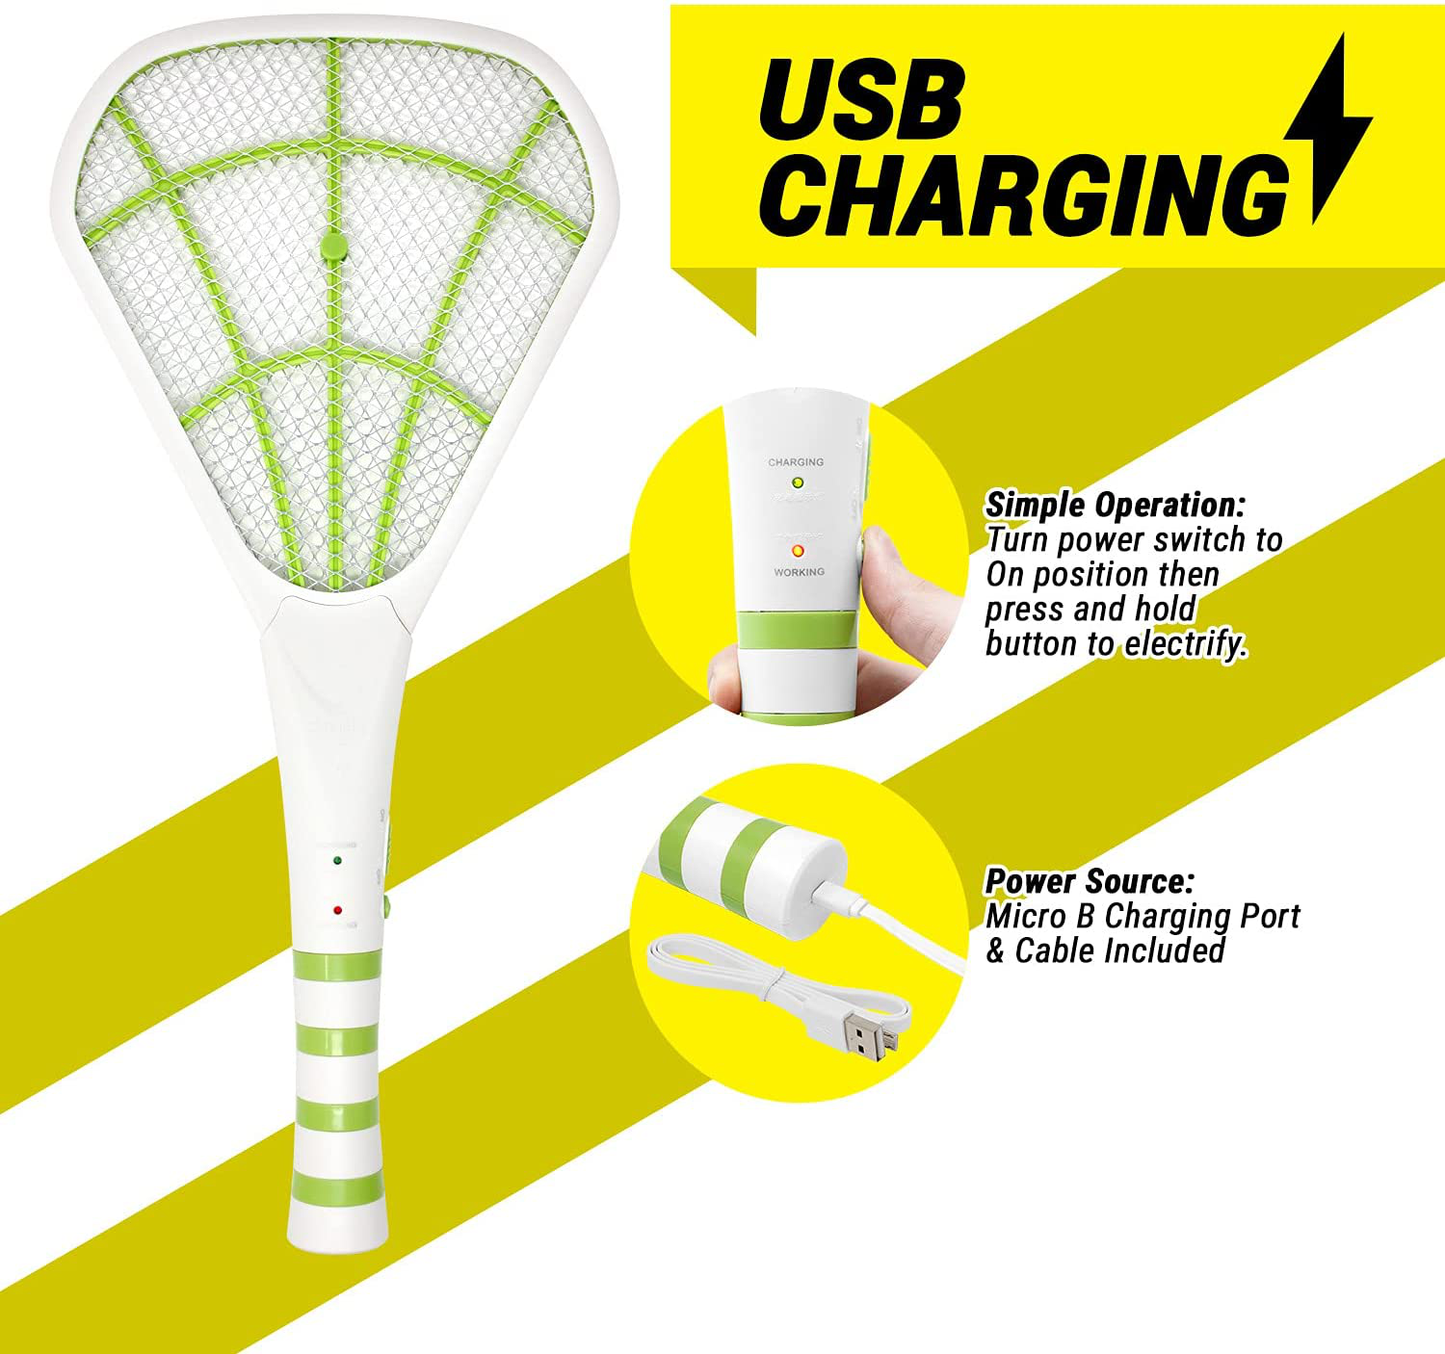 BugKwikZap 2PK of USB Rechargeable Electric Bug Zapper 3600V, Mosquito Killer Racket, Rechargeable Battery Powered Fly Swatter (White-Green)